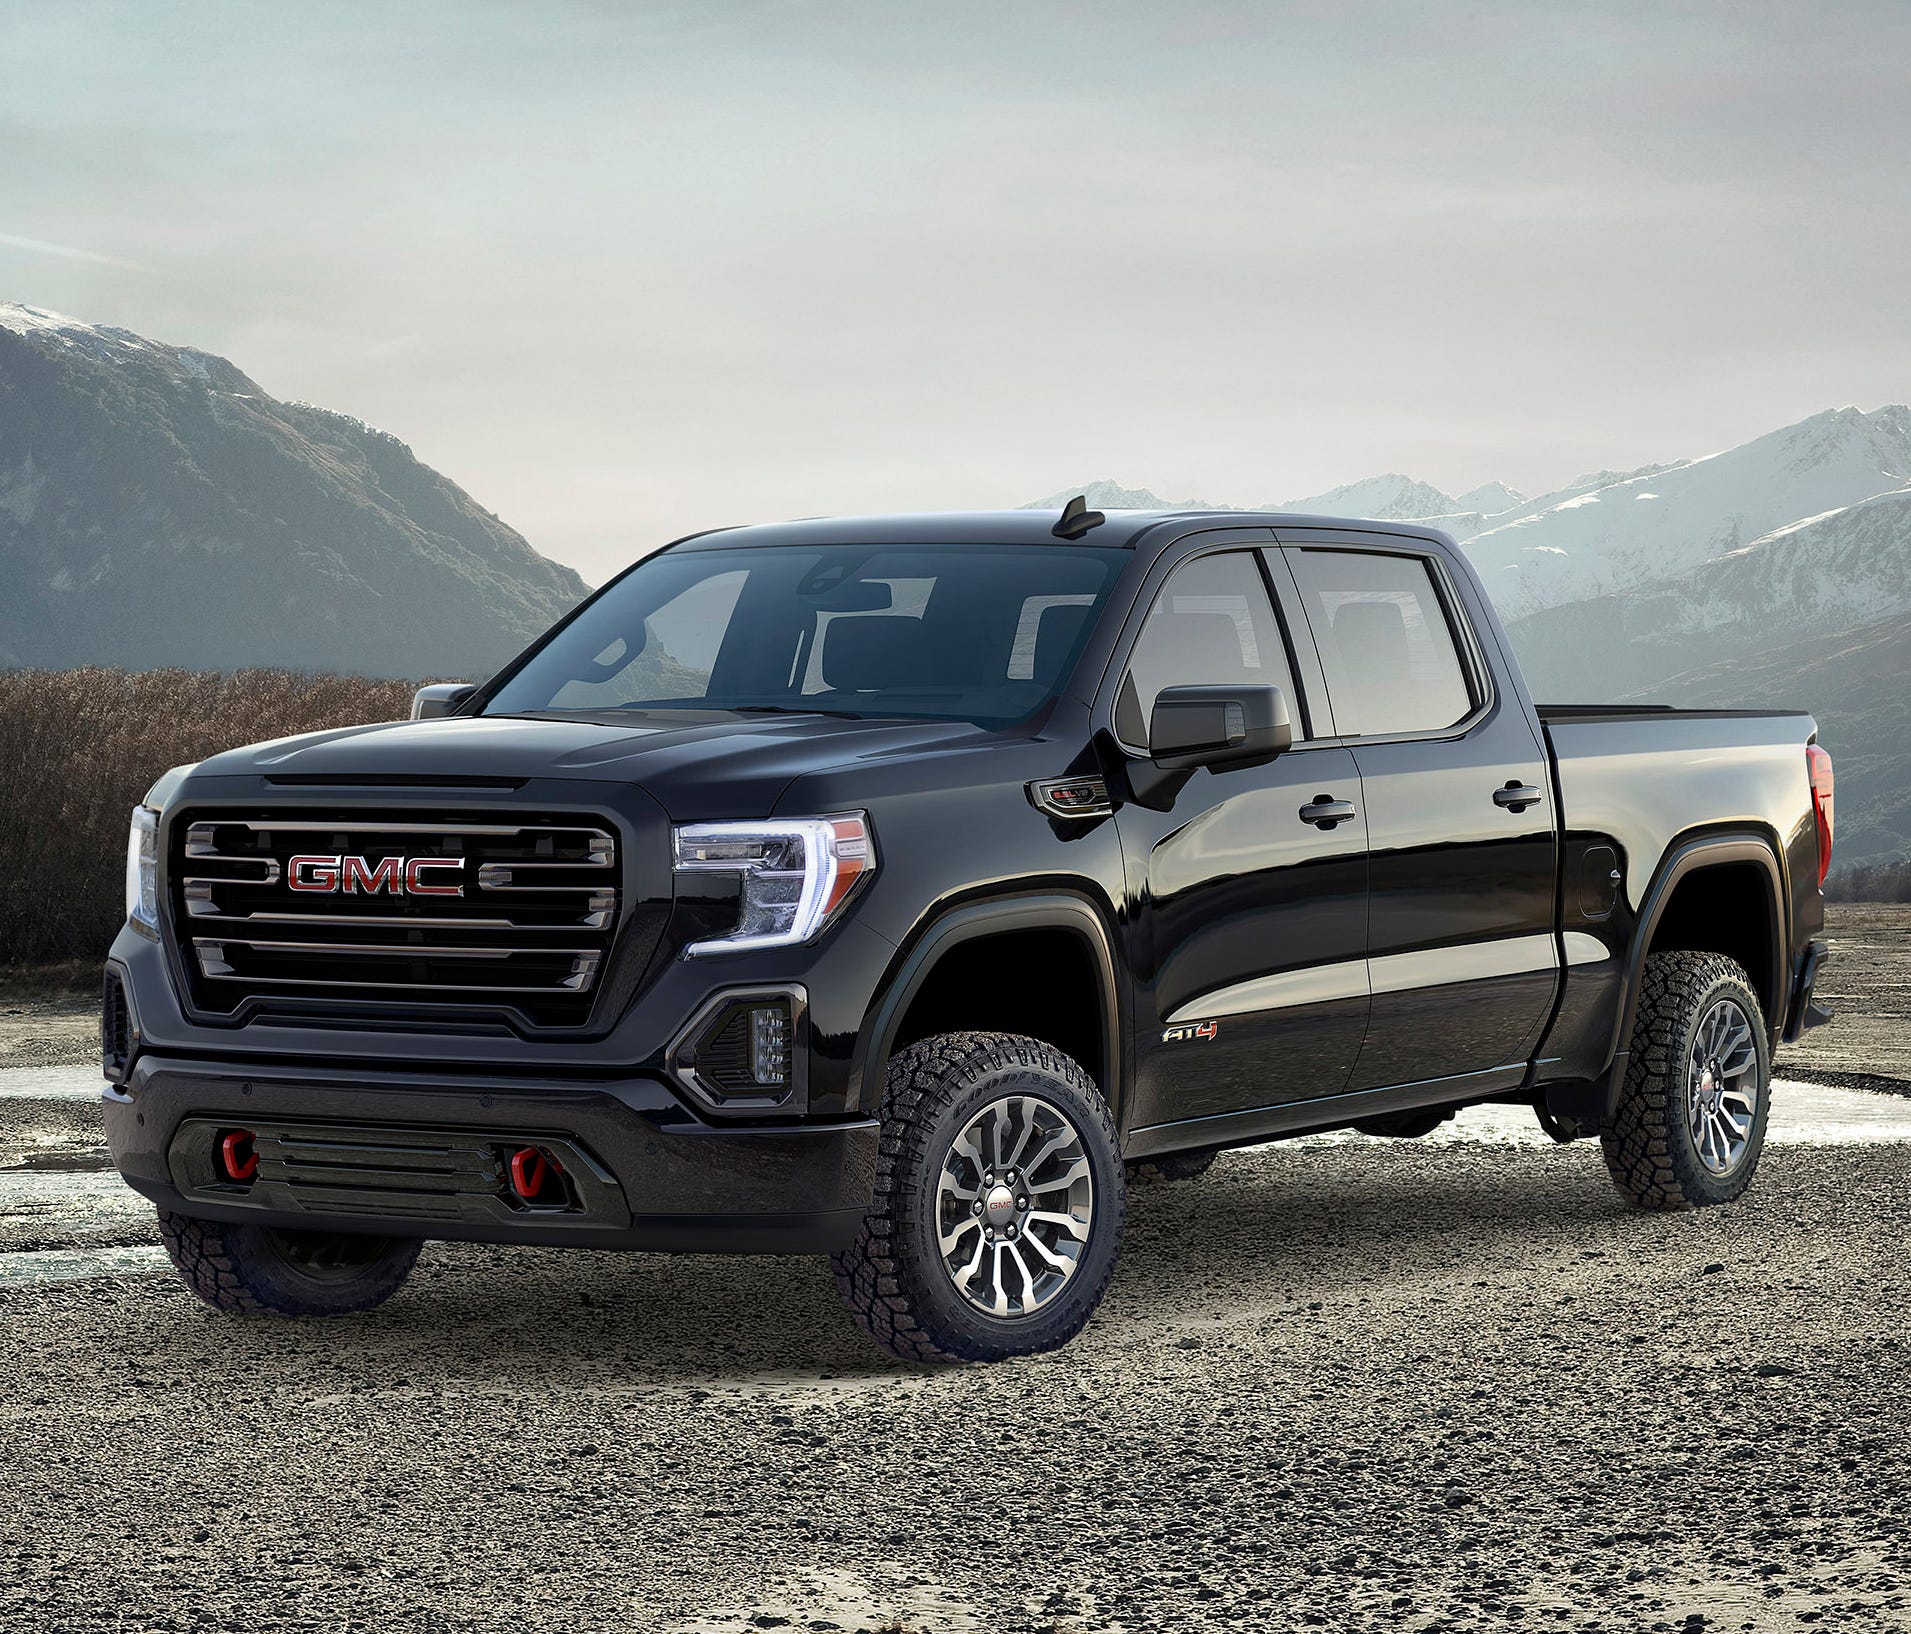 This undated photo provided by General Motors shows the 2019 GMC Sierra. The 2019 Sierra will offer a more upscale interior than the Chevy, along with other exclusive features such as a carbon-fiber cargo box and enhanced technology.